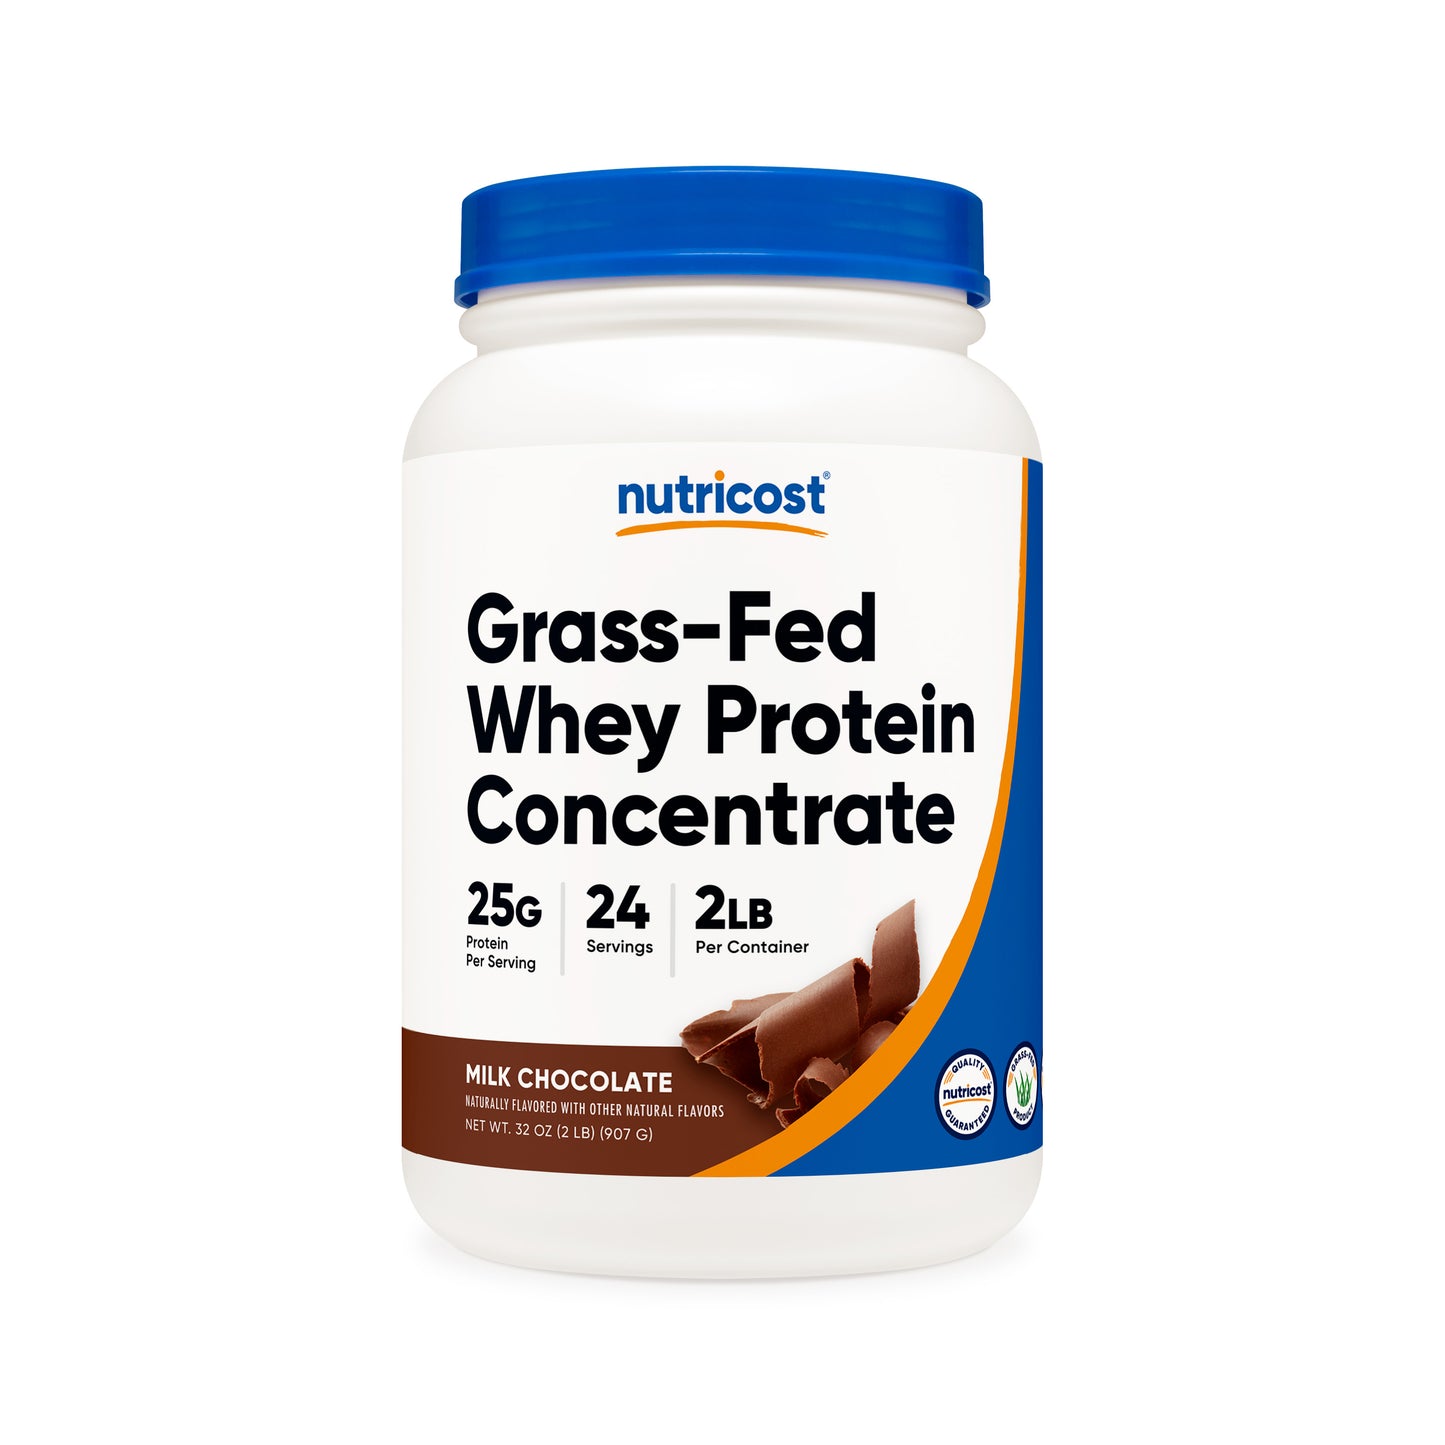 Nutricost Grass-Fed Whey Protein Concentrate Powder